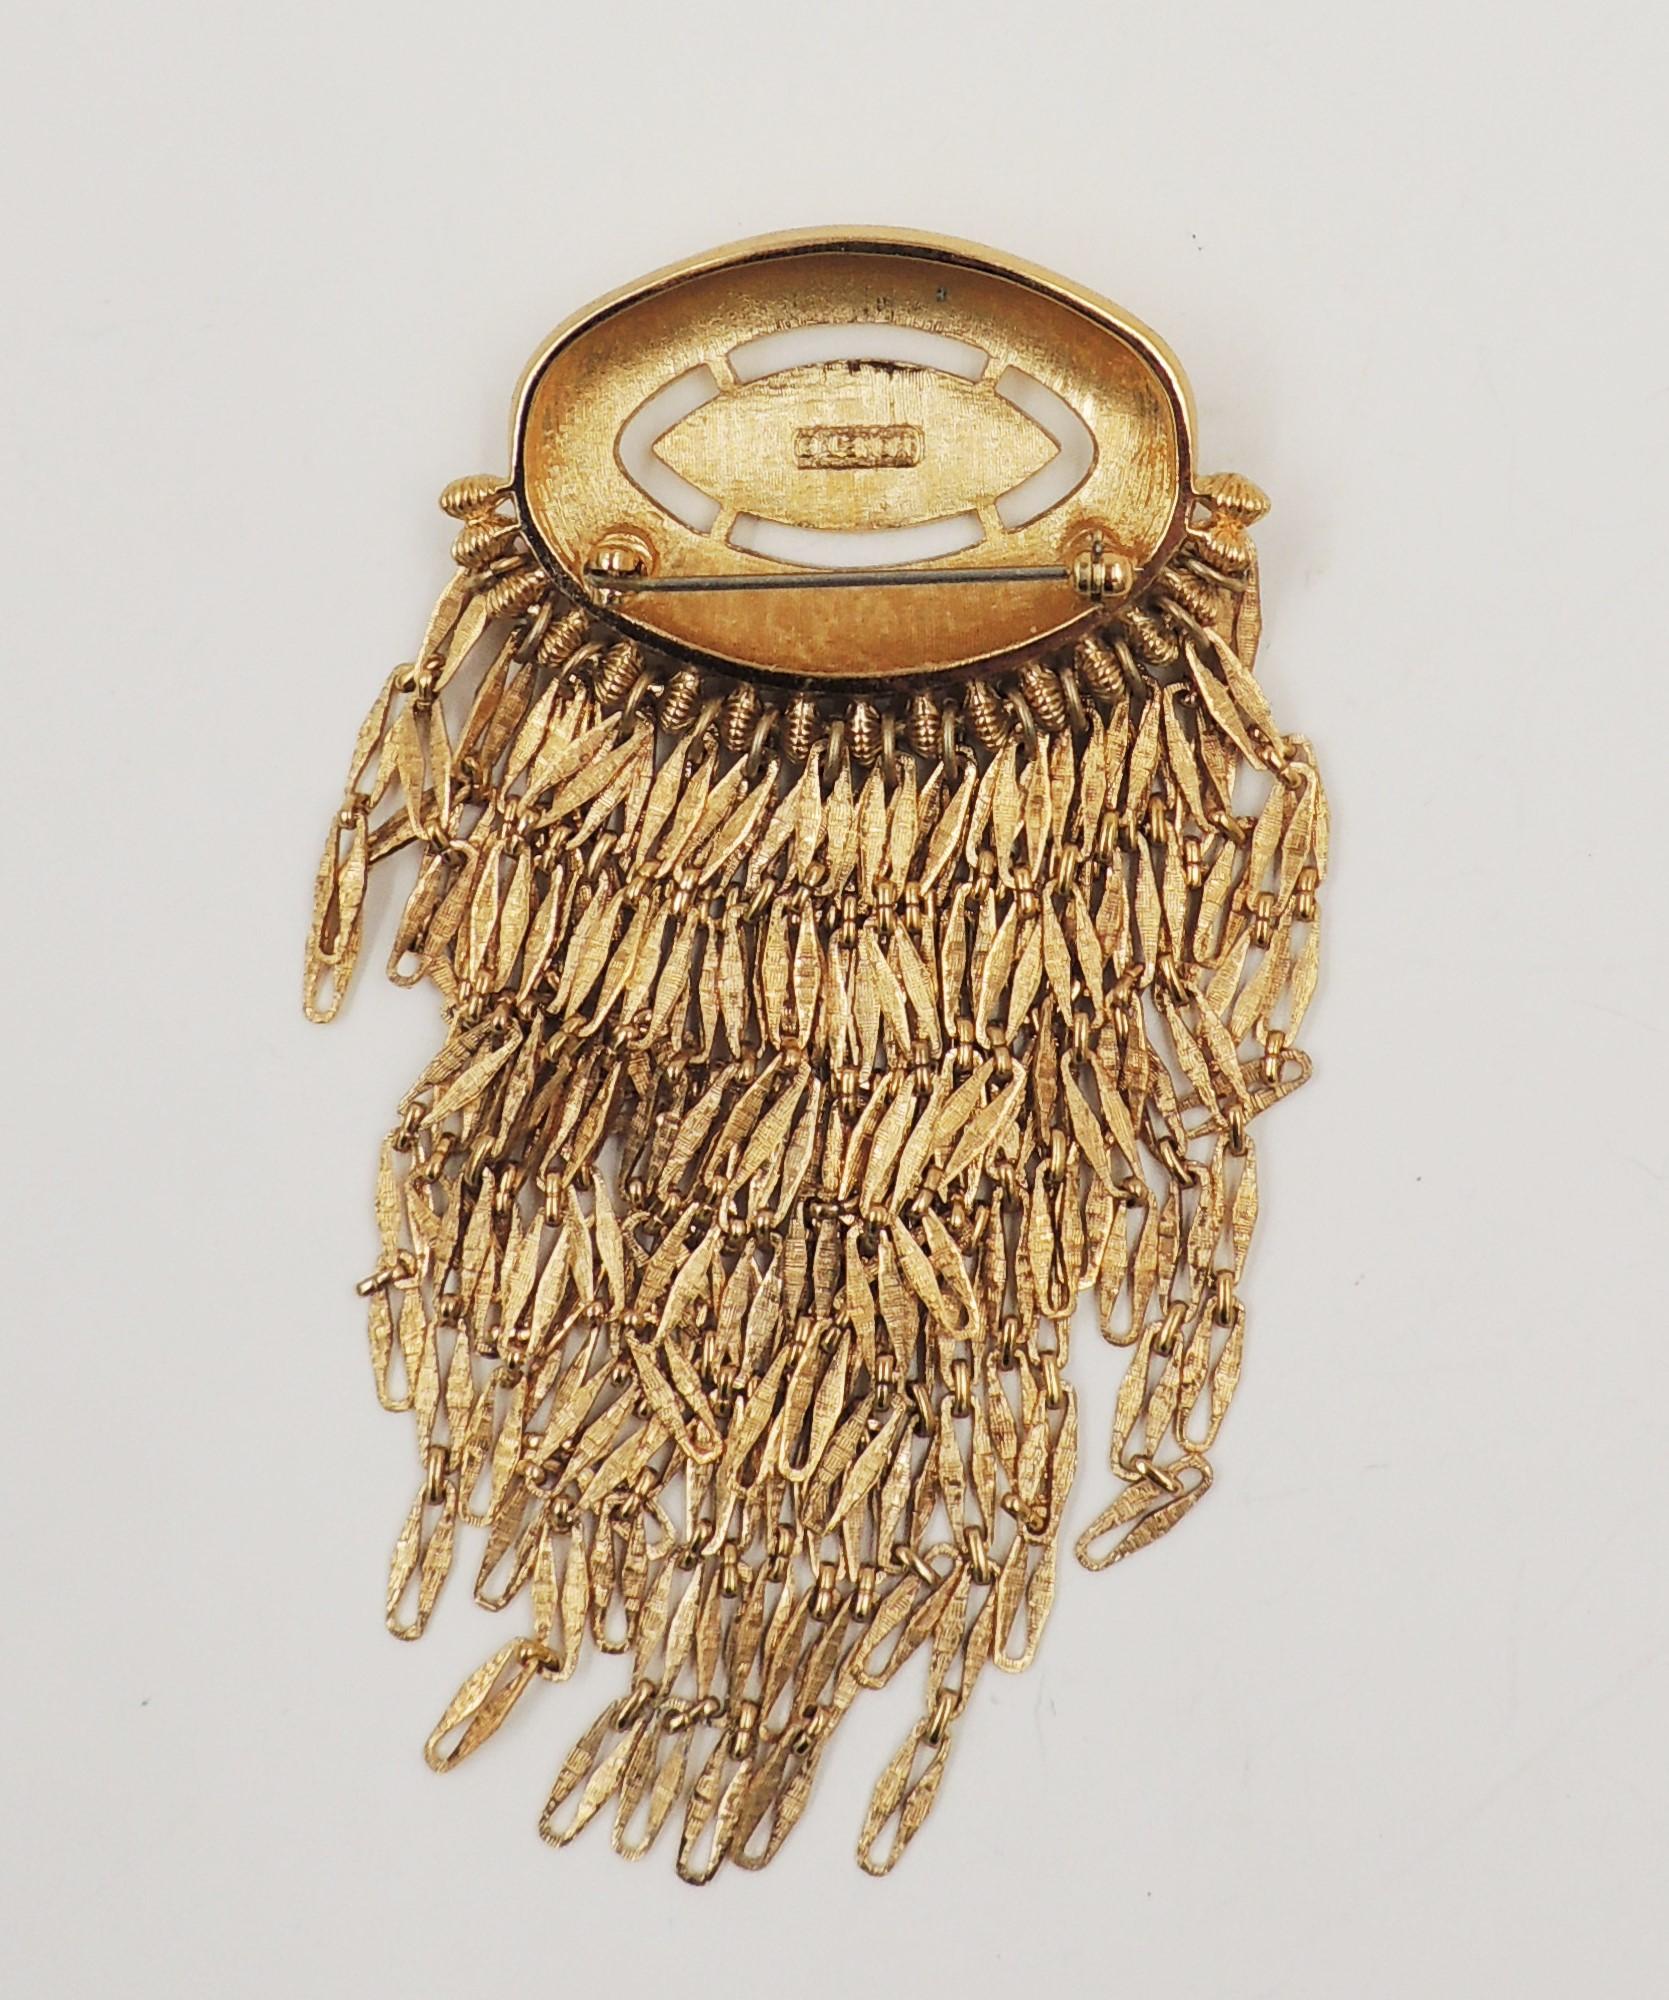 1960s goldtone Florentine finish top with fringe bottom brooch with security clasp. Marked 